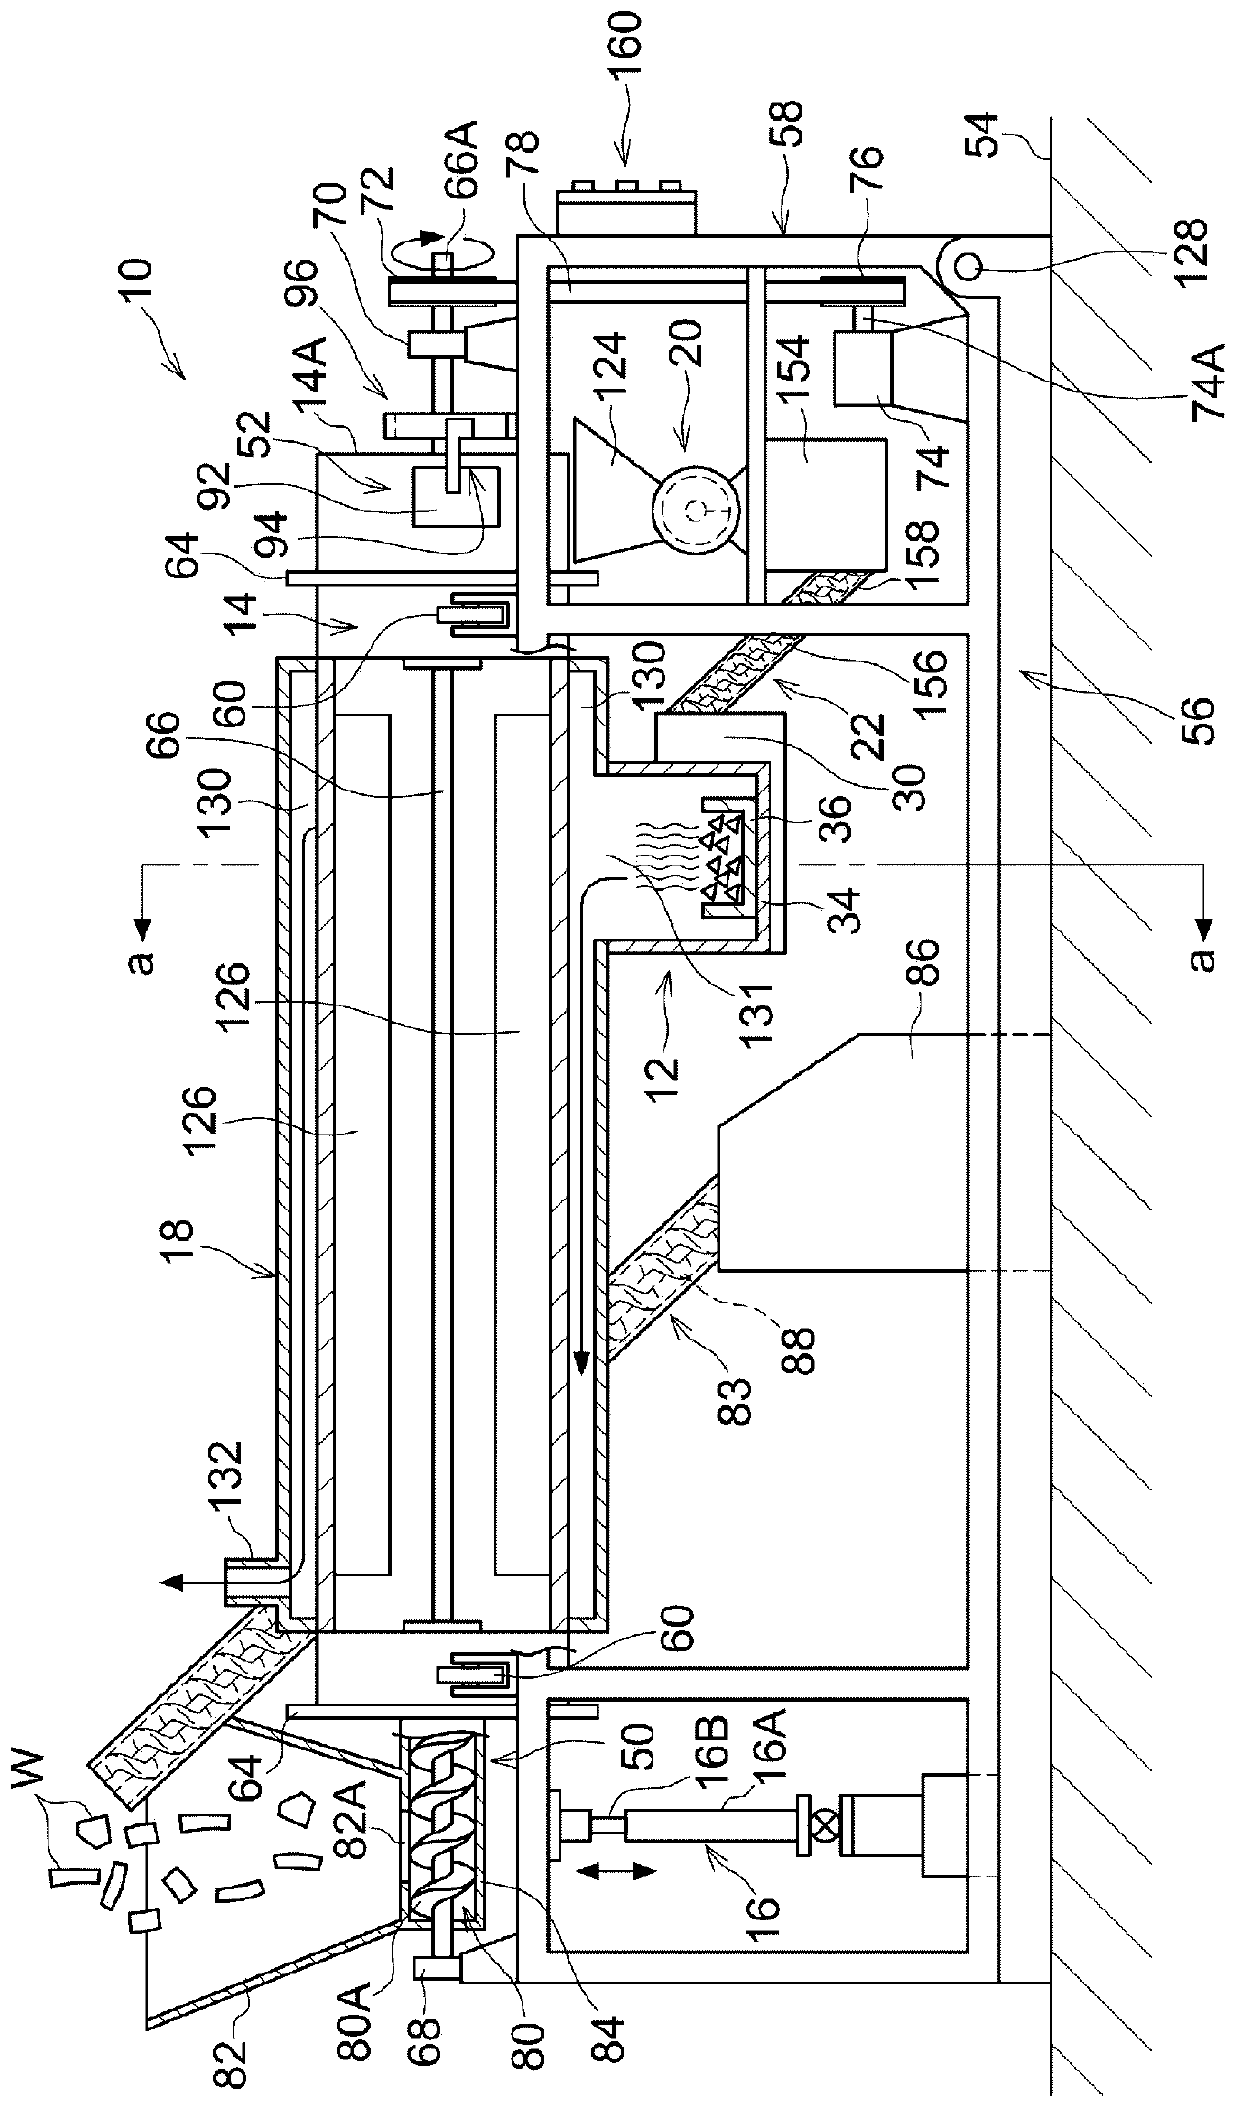 Device for producing biomass fuel